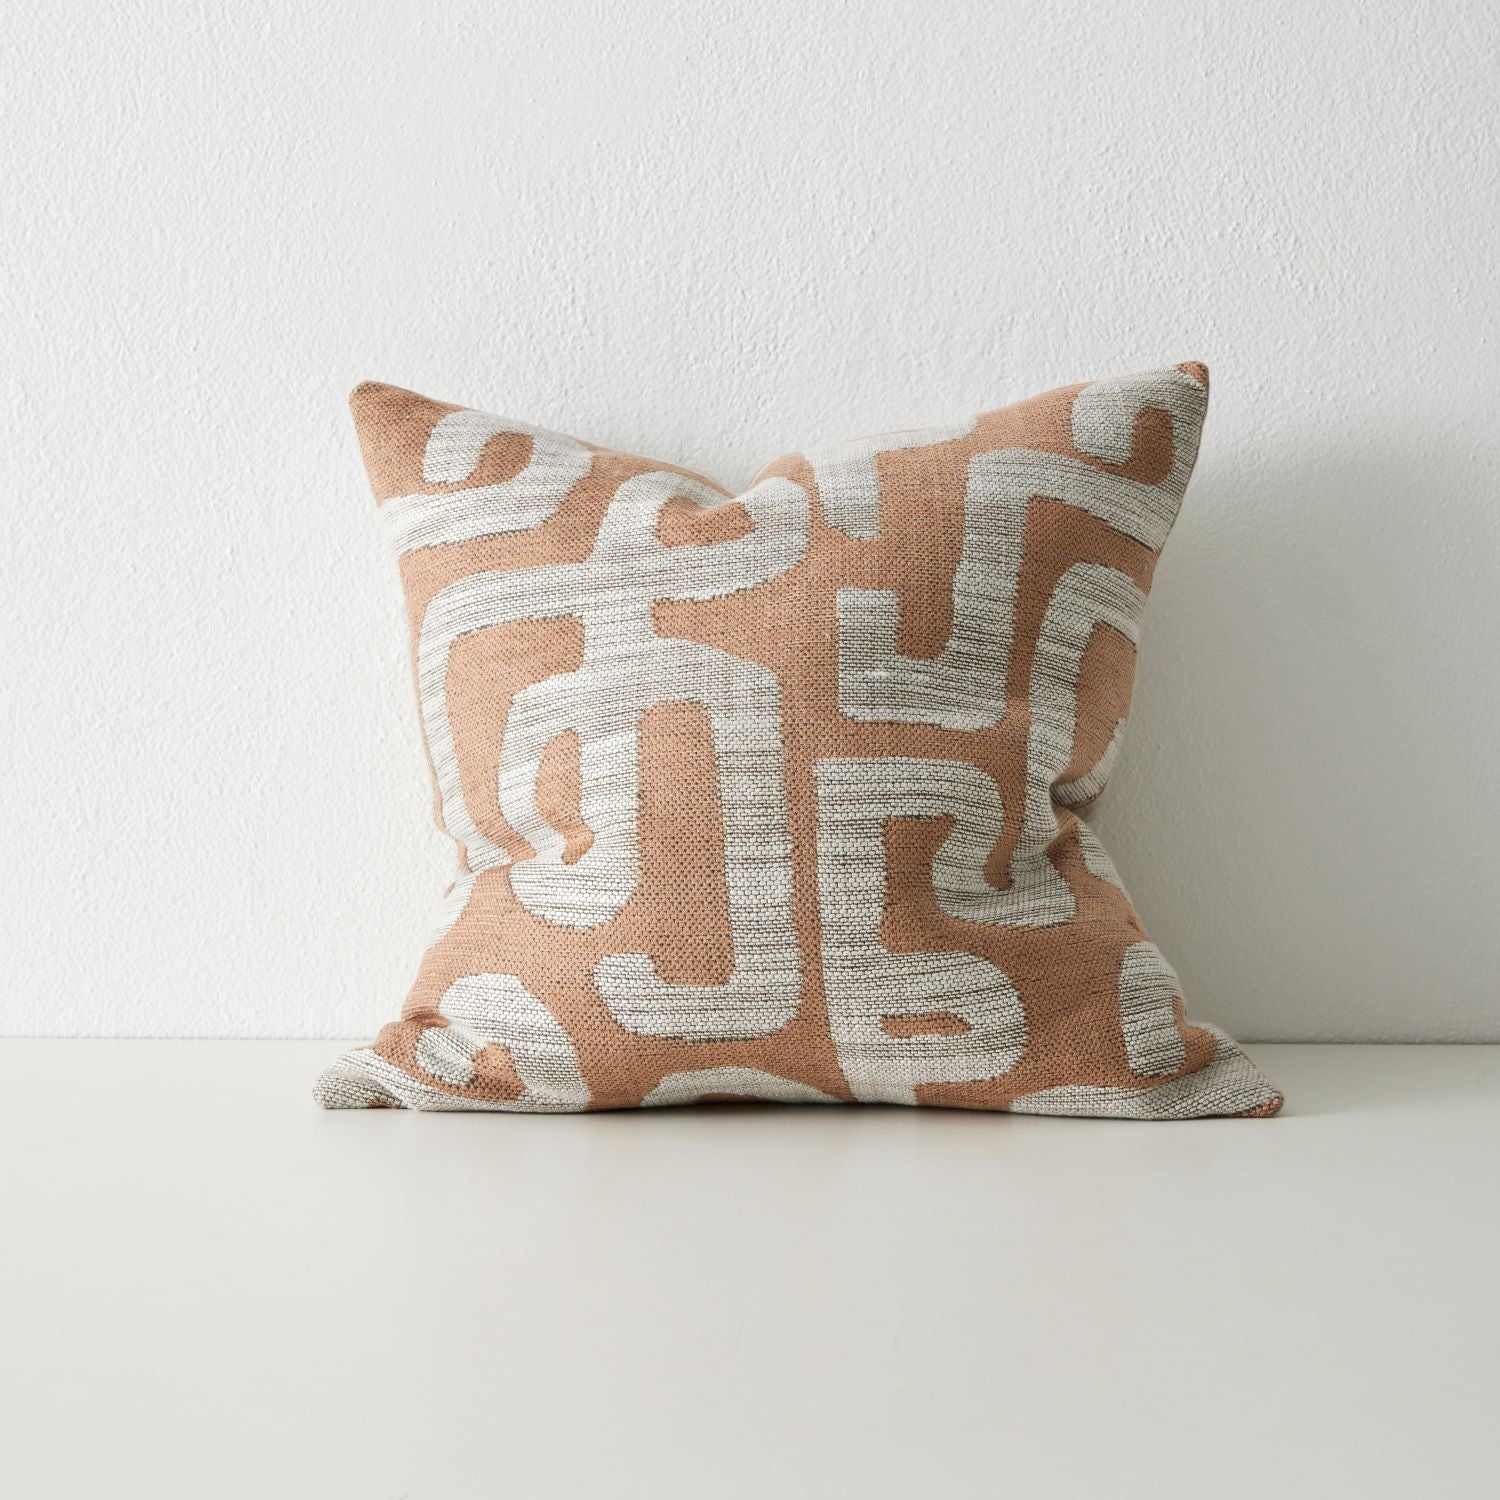 Serene cushion with geometric ikat pattern in coral and grey